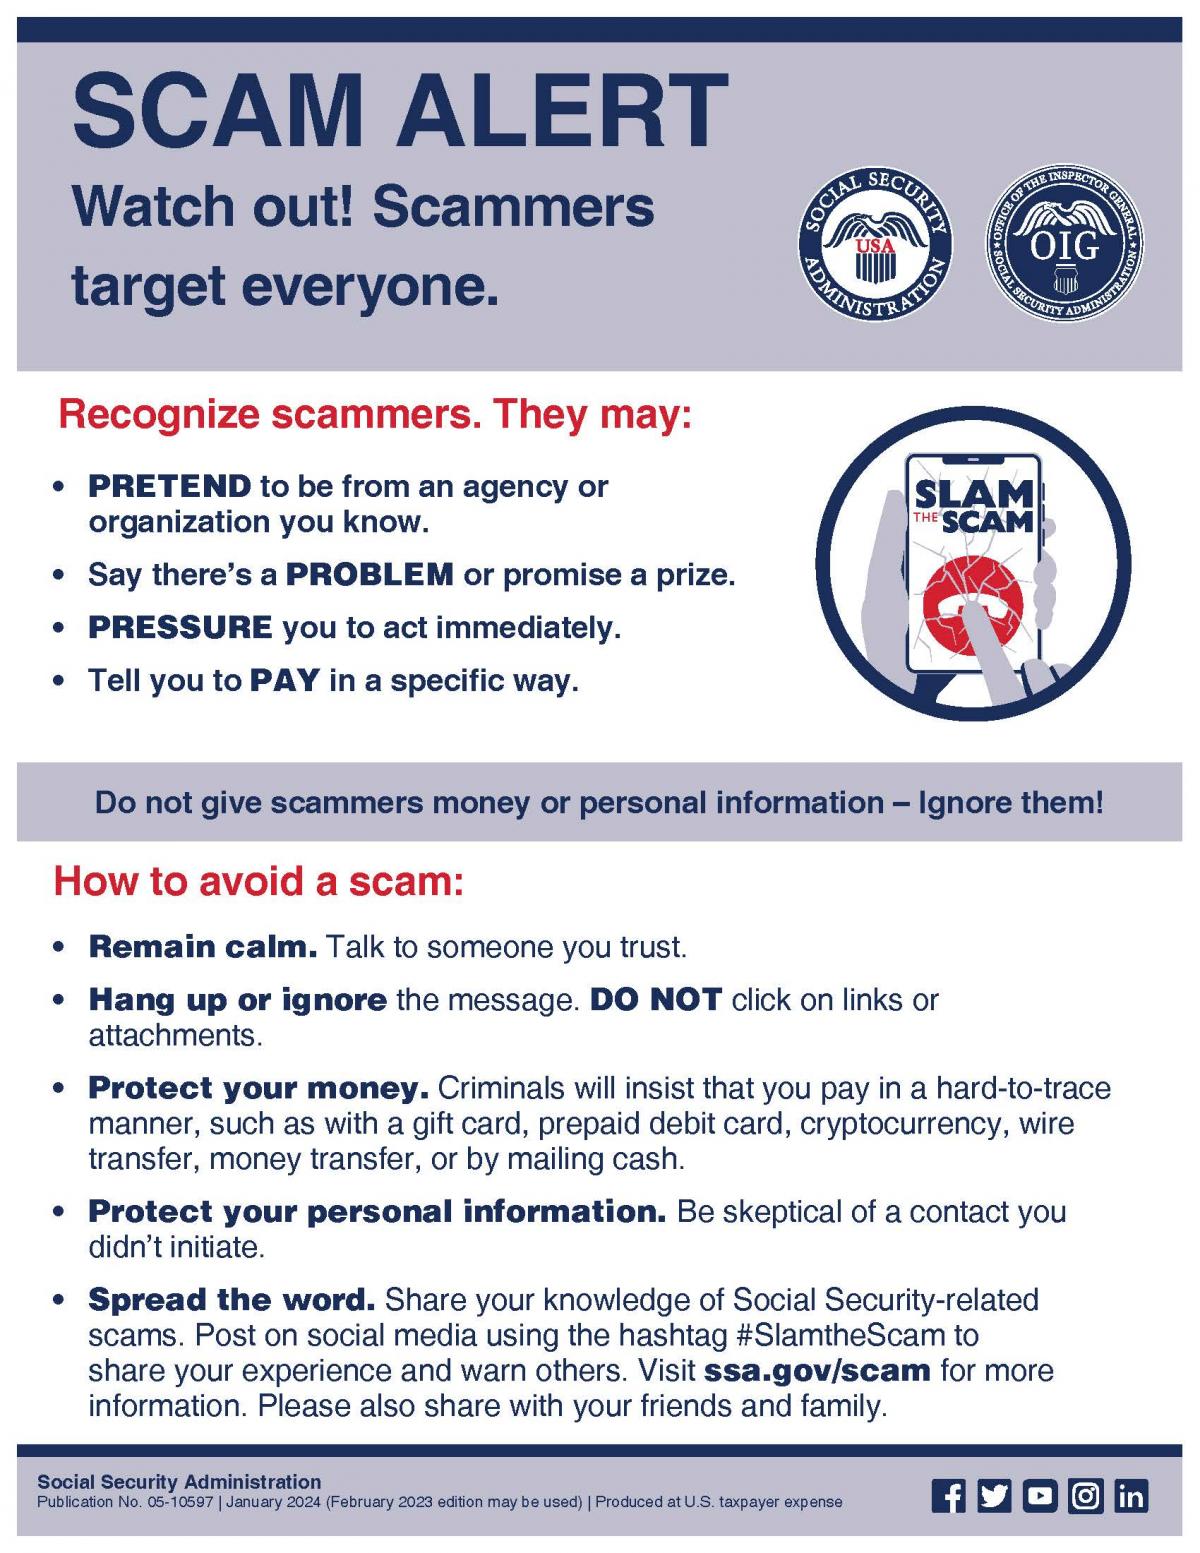 Slam the Scam | Social Security Administration